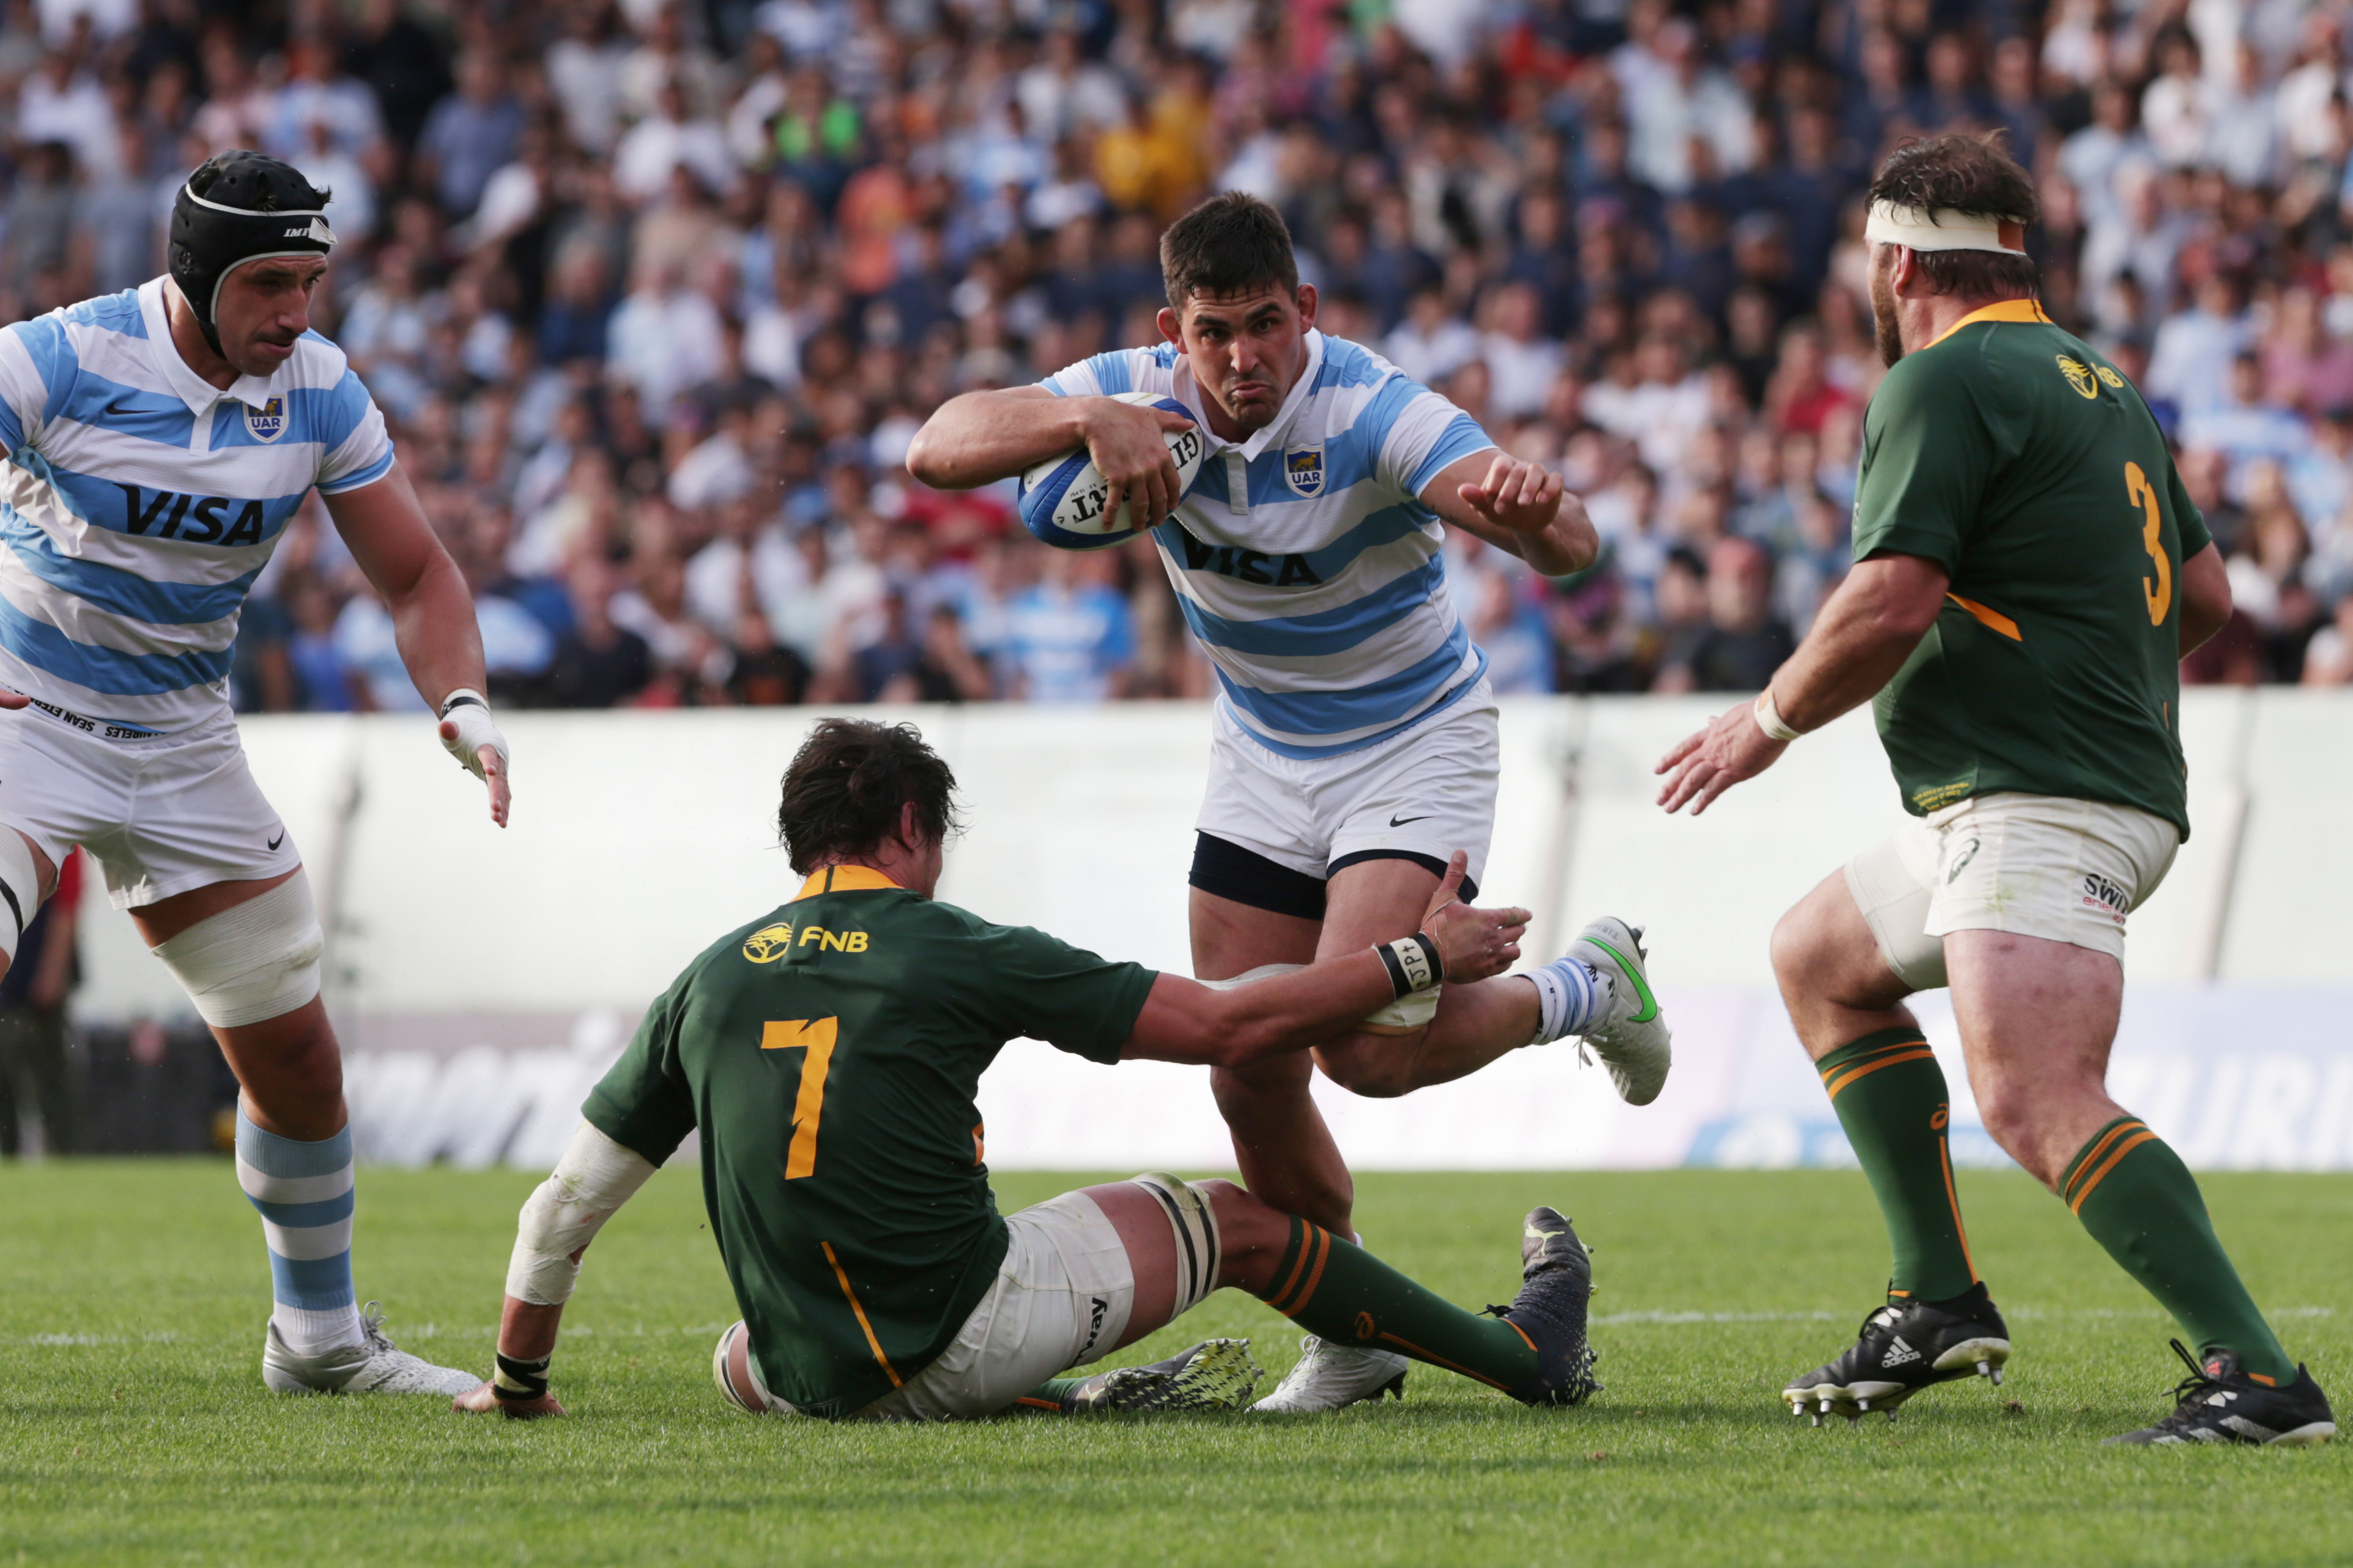 Pablo Matera of Argentina attempts to avoid a tackle.